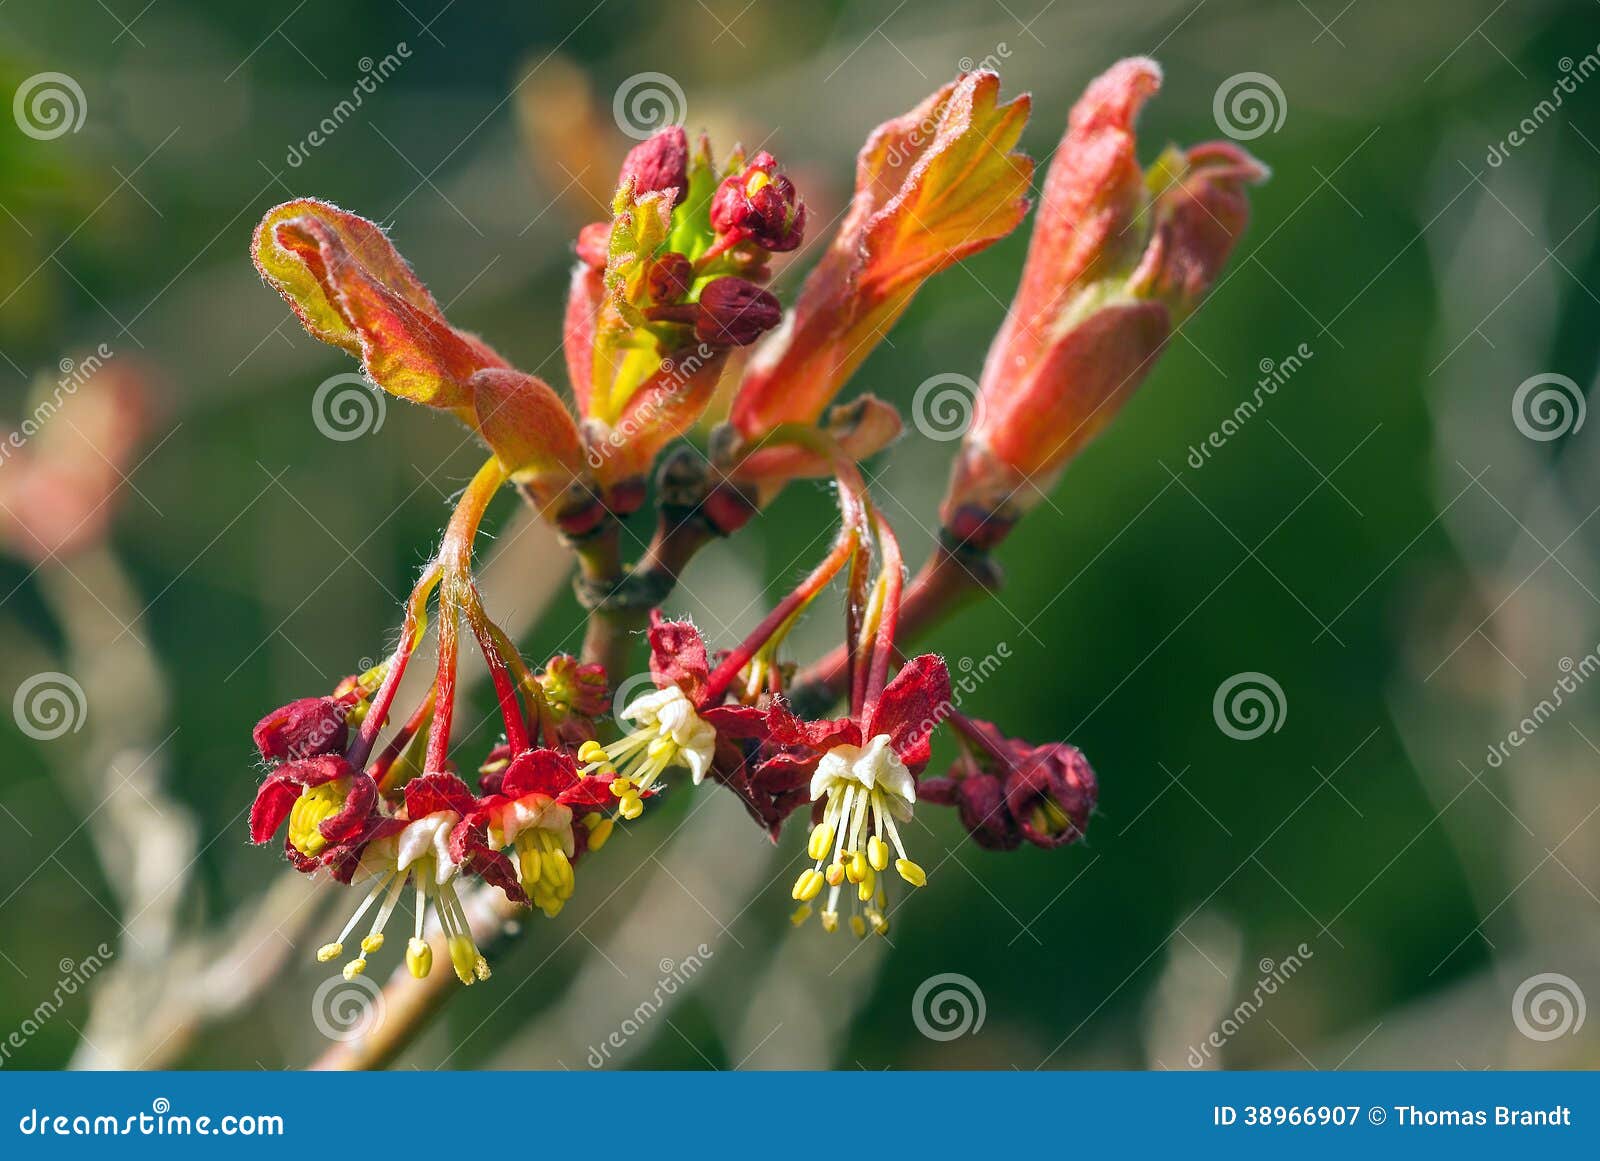 Japanese Maple Tree Flowers in Spring. Clusters of tiny red flowers with long white stamens hang from branches of Acer palmatum in early spring with opening red-coloured leaf buds isolated against a blurred green nature background.